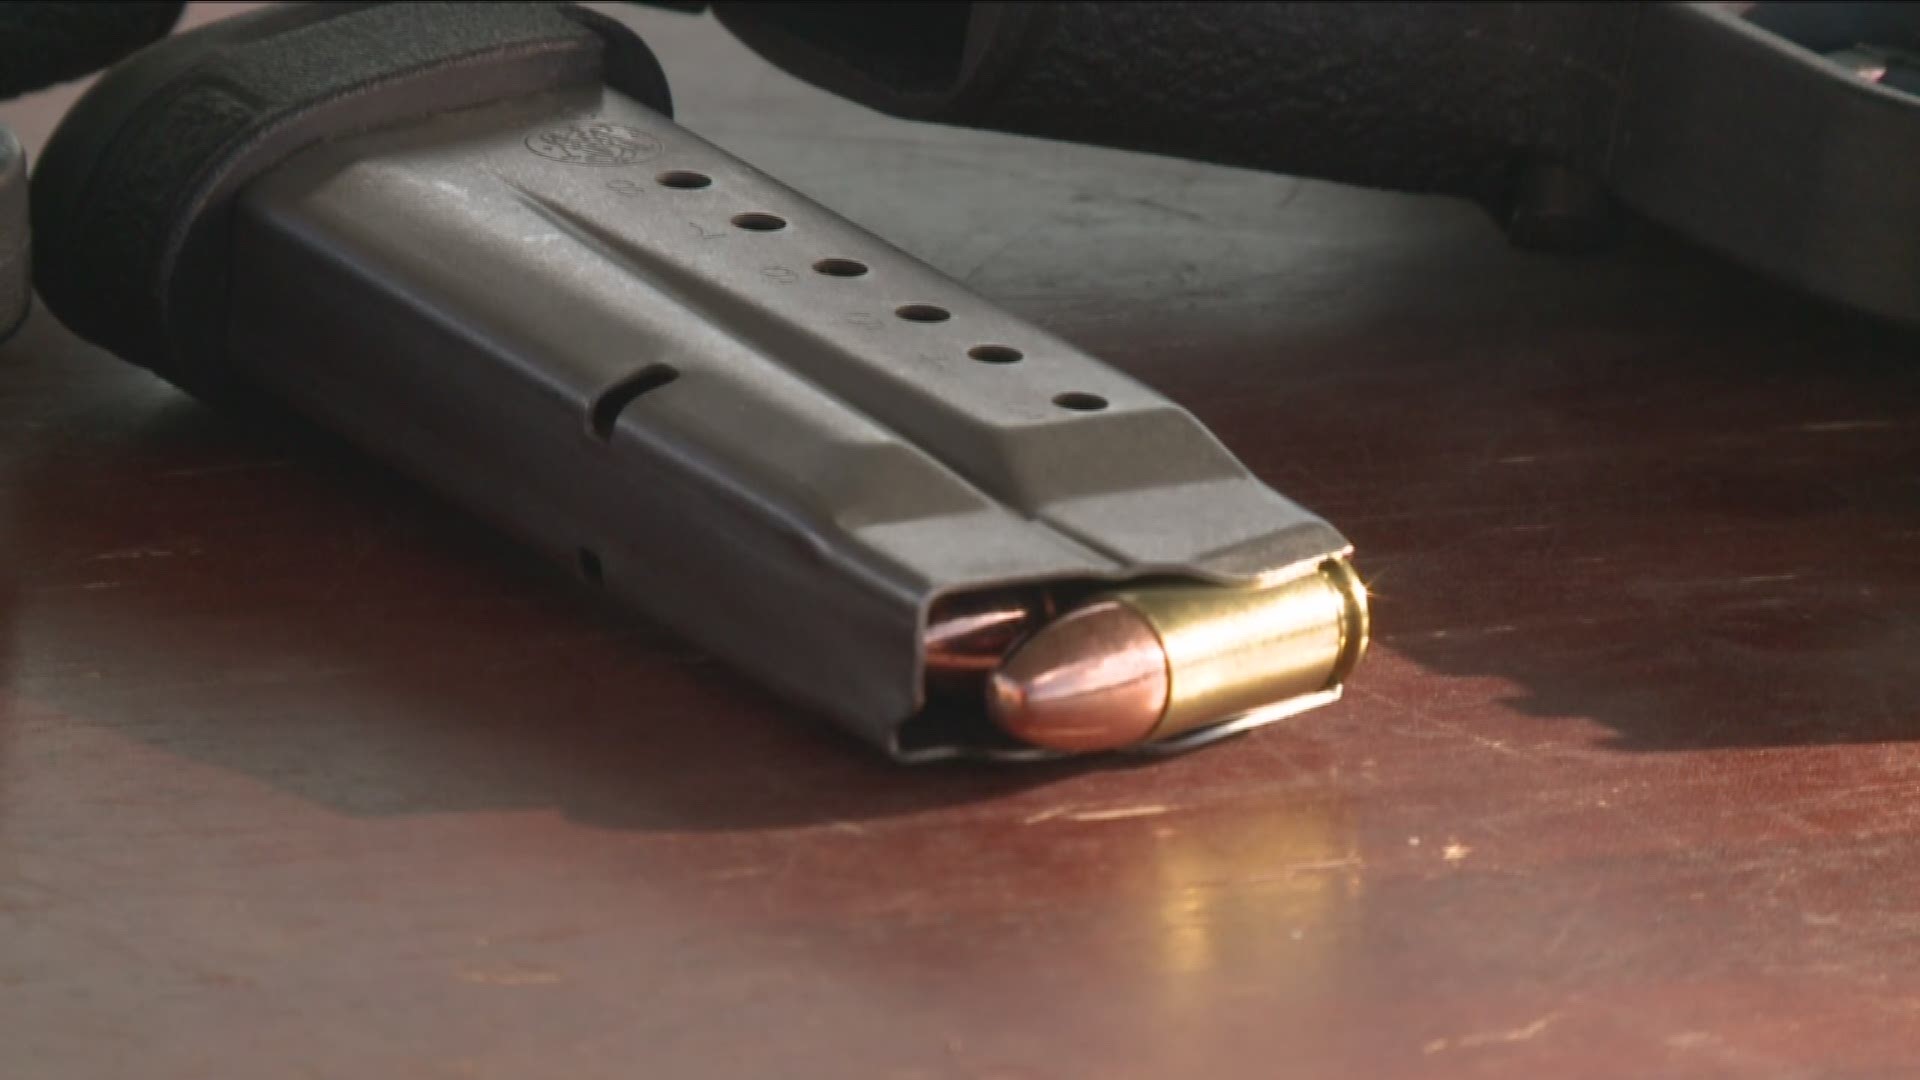 Would you apply for a concealed weapons permit?